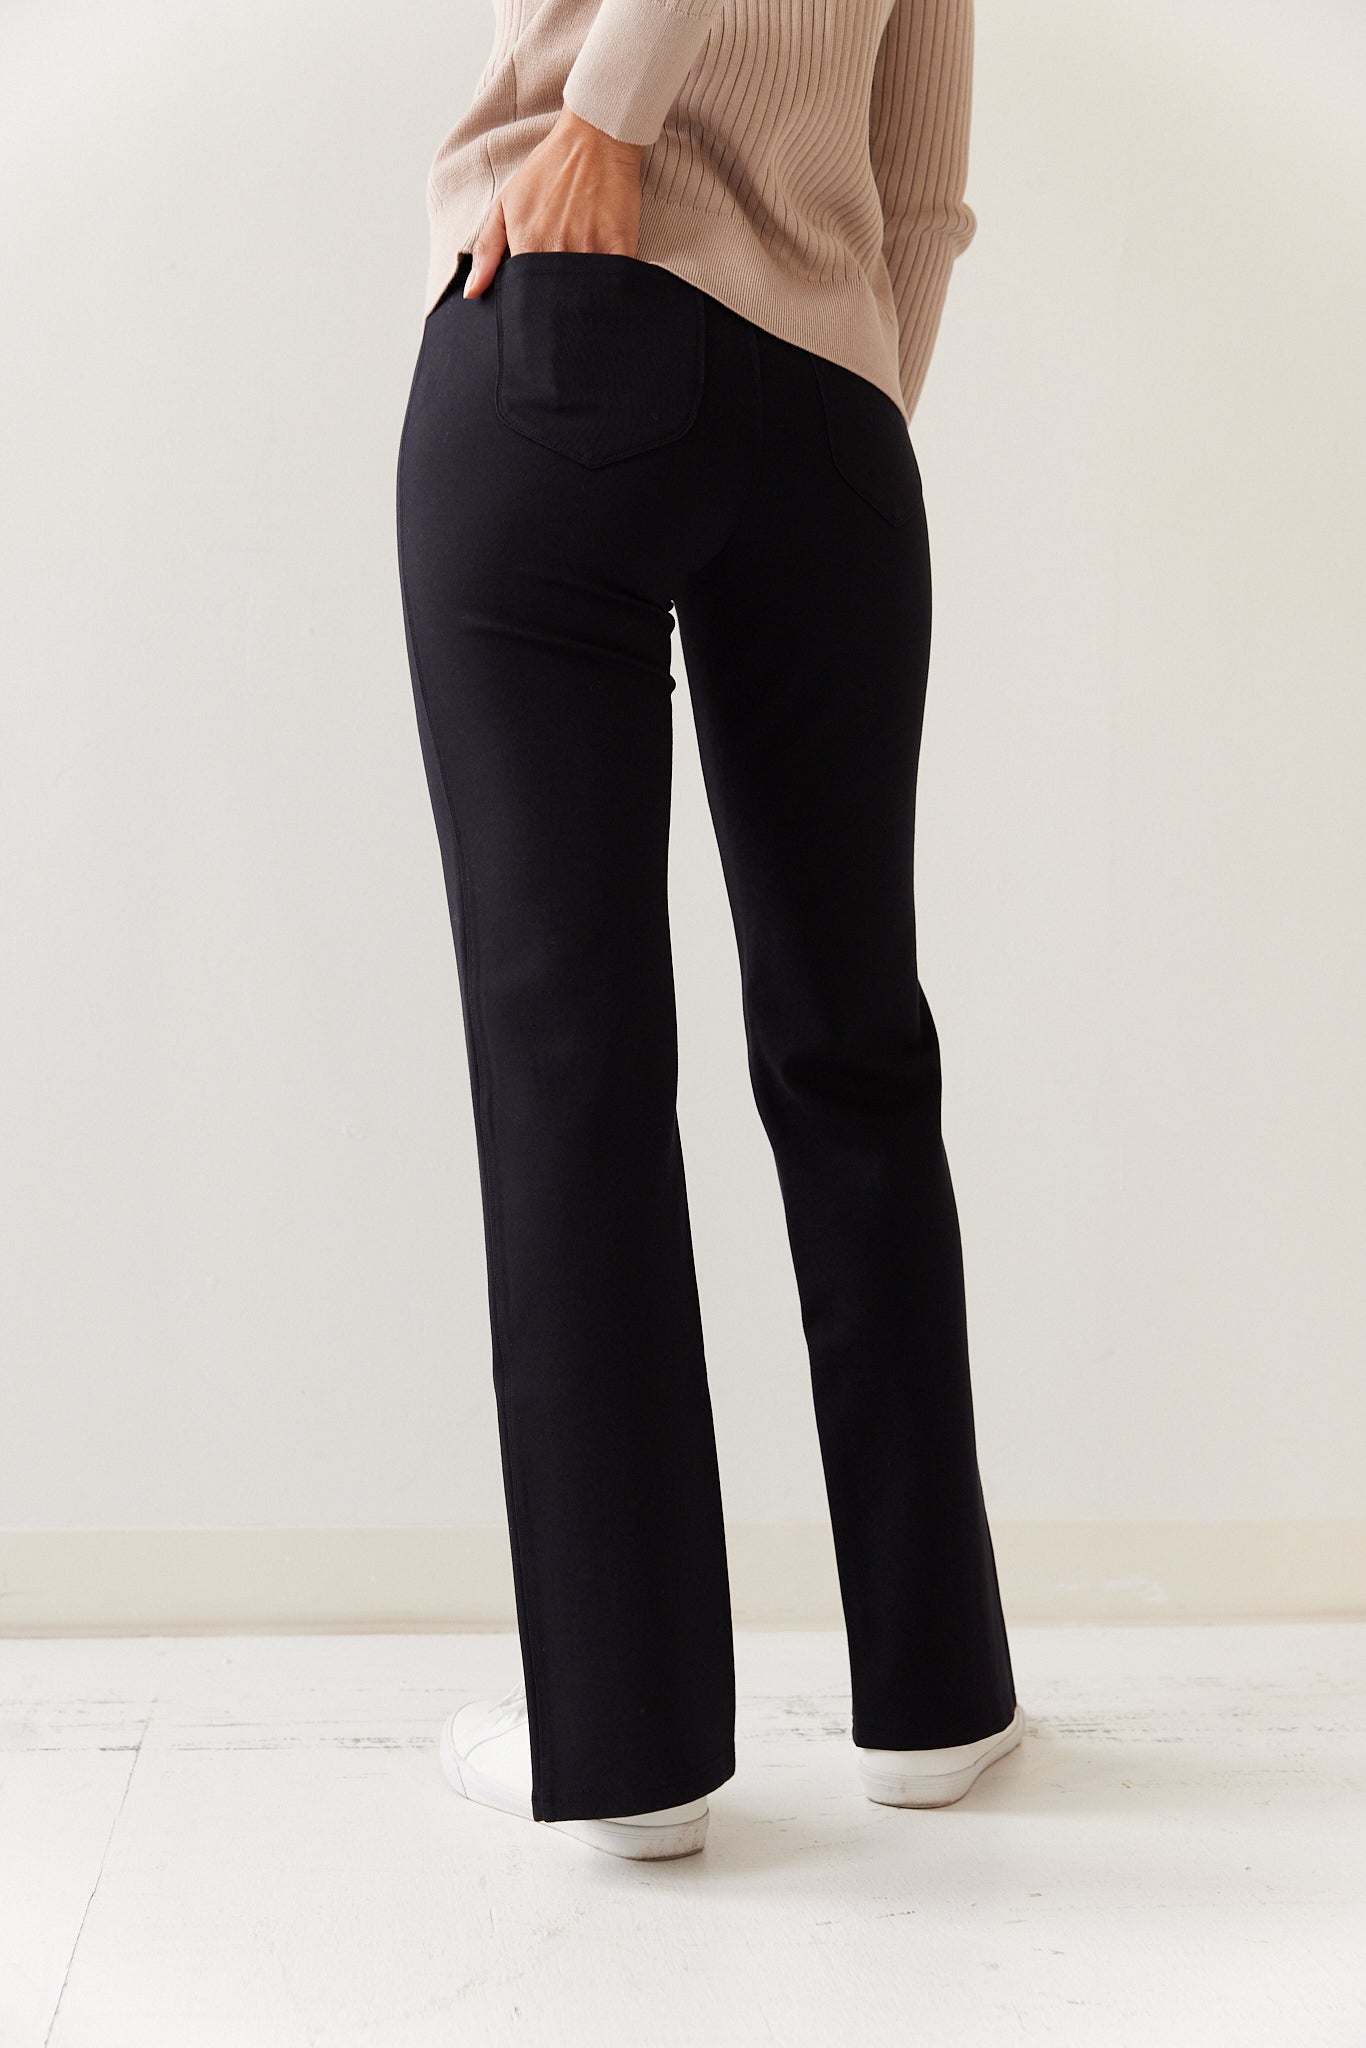 The Slit Front Ponte Pant